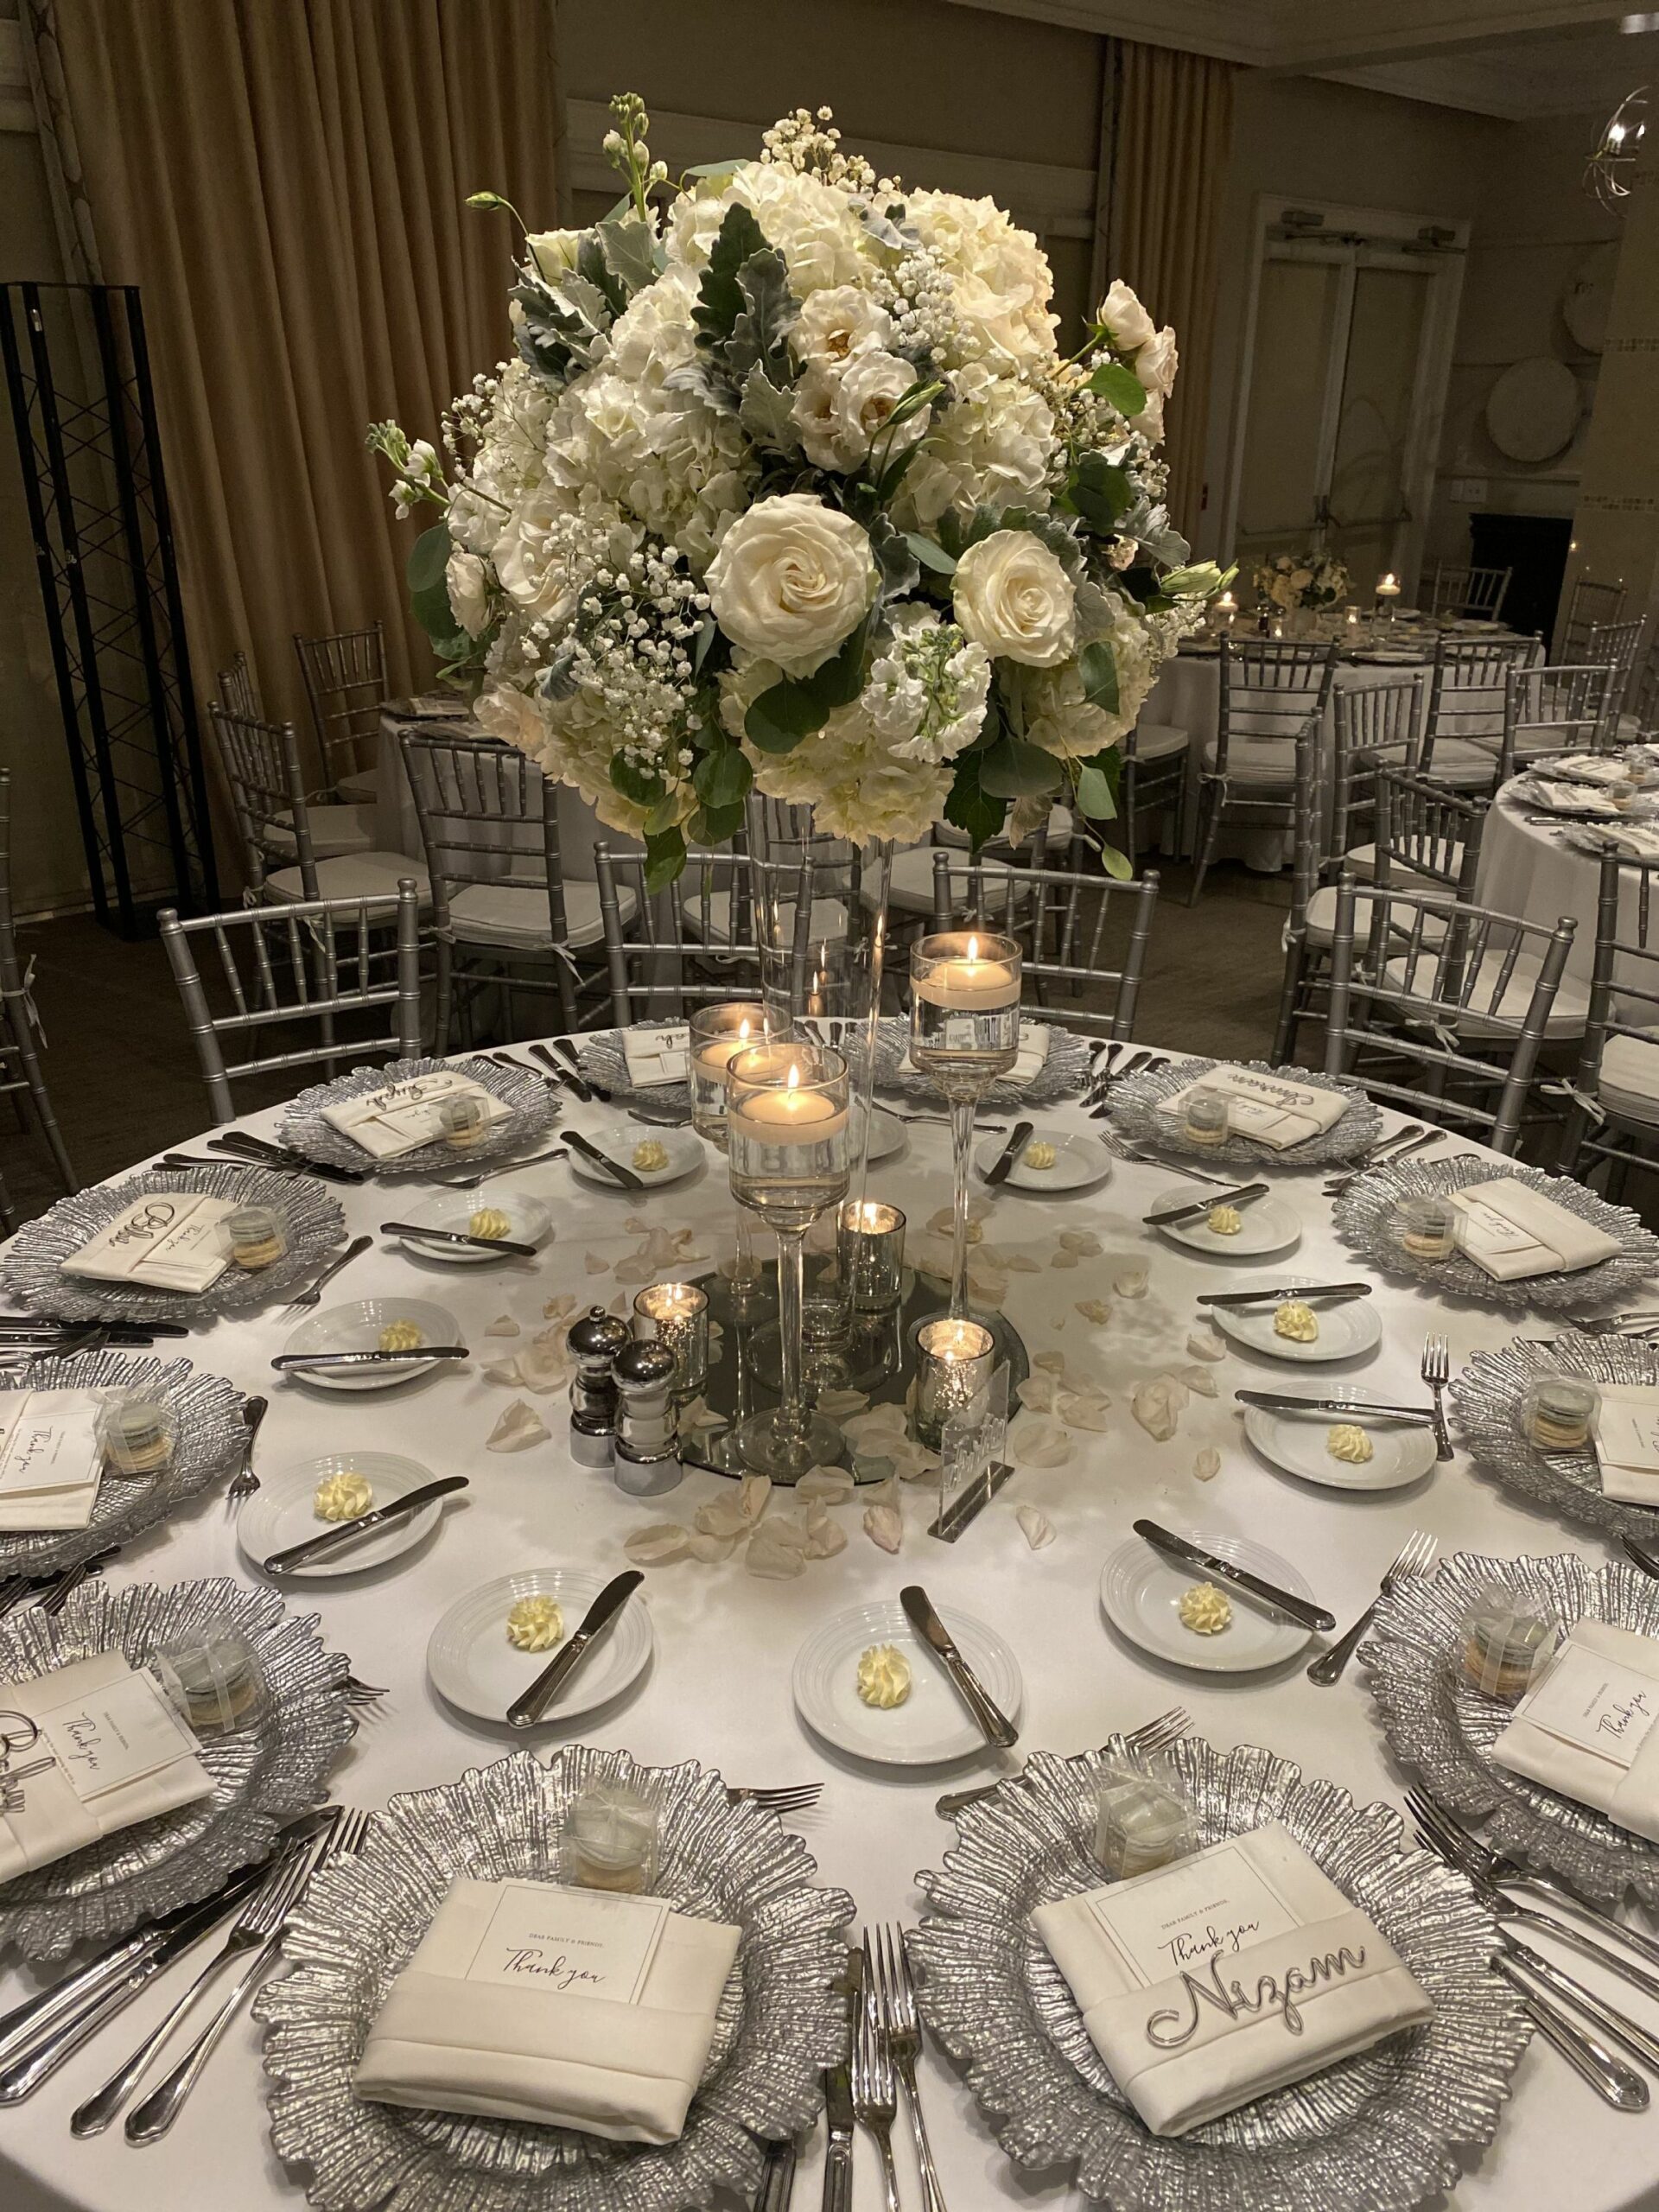 Elegant white and silver table setting  Table arrangements